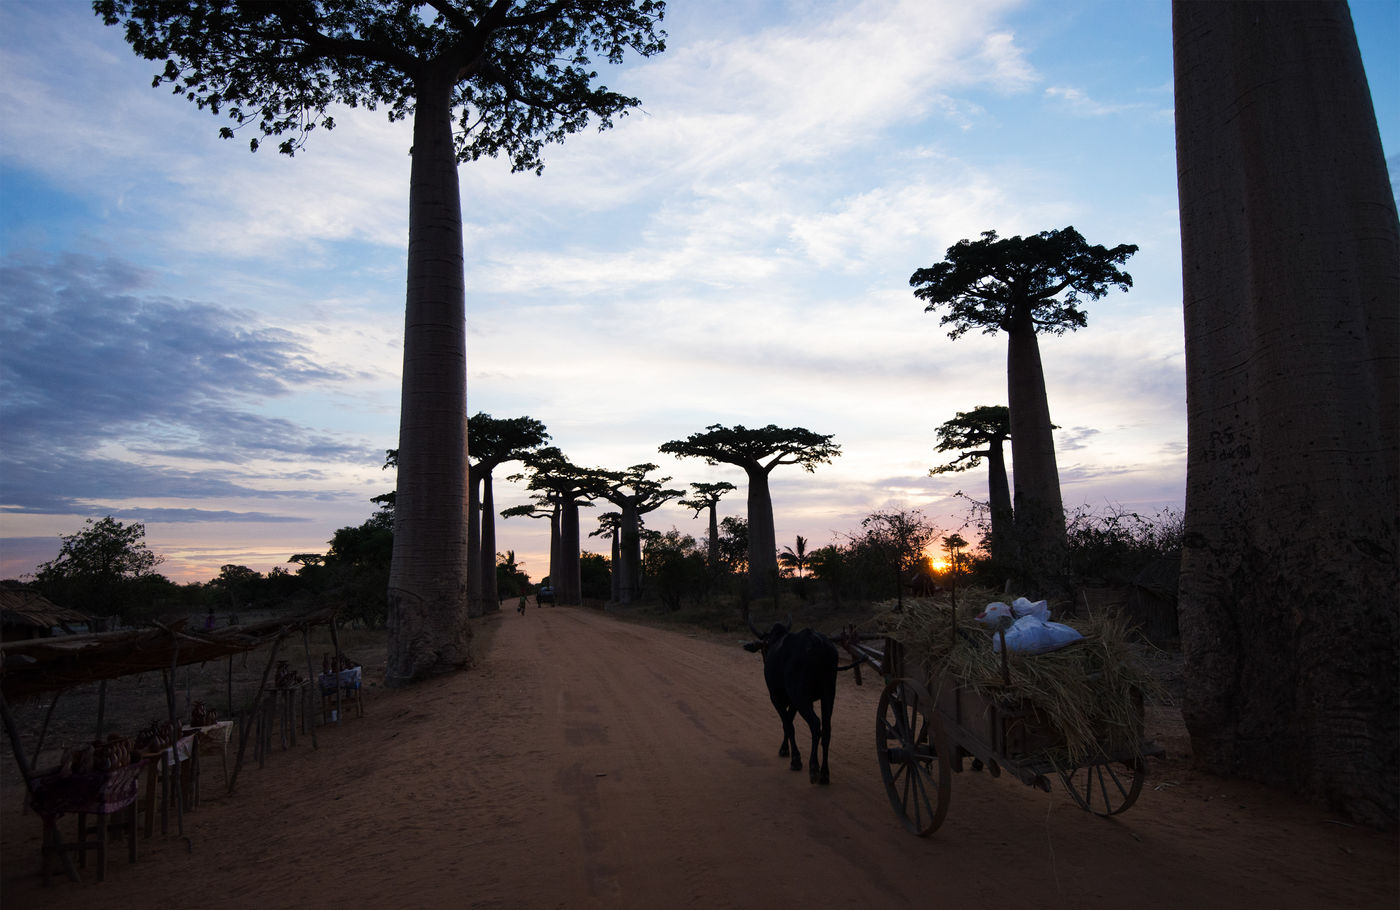 The baobabs don't lie, it's dry here on the west side of the island! © Samuel De Rycke